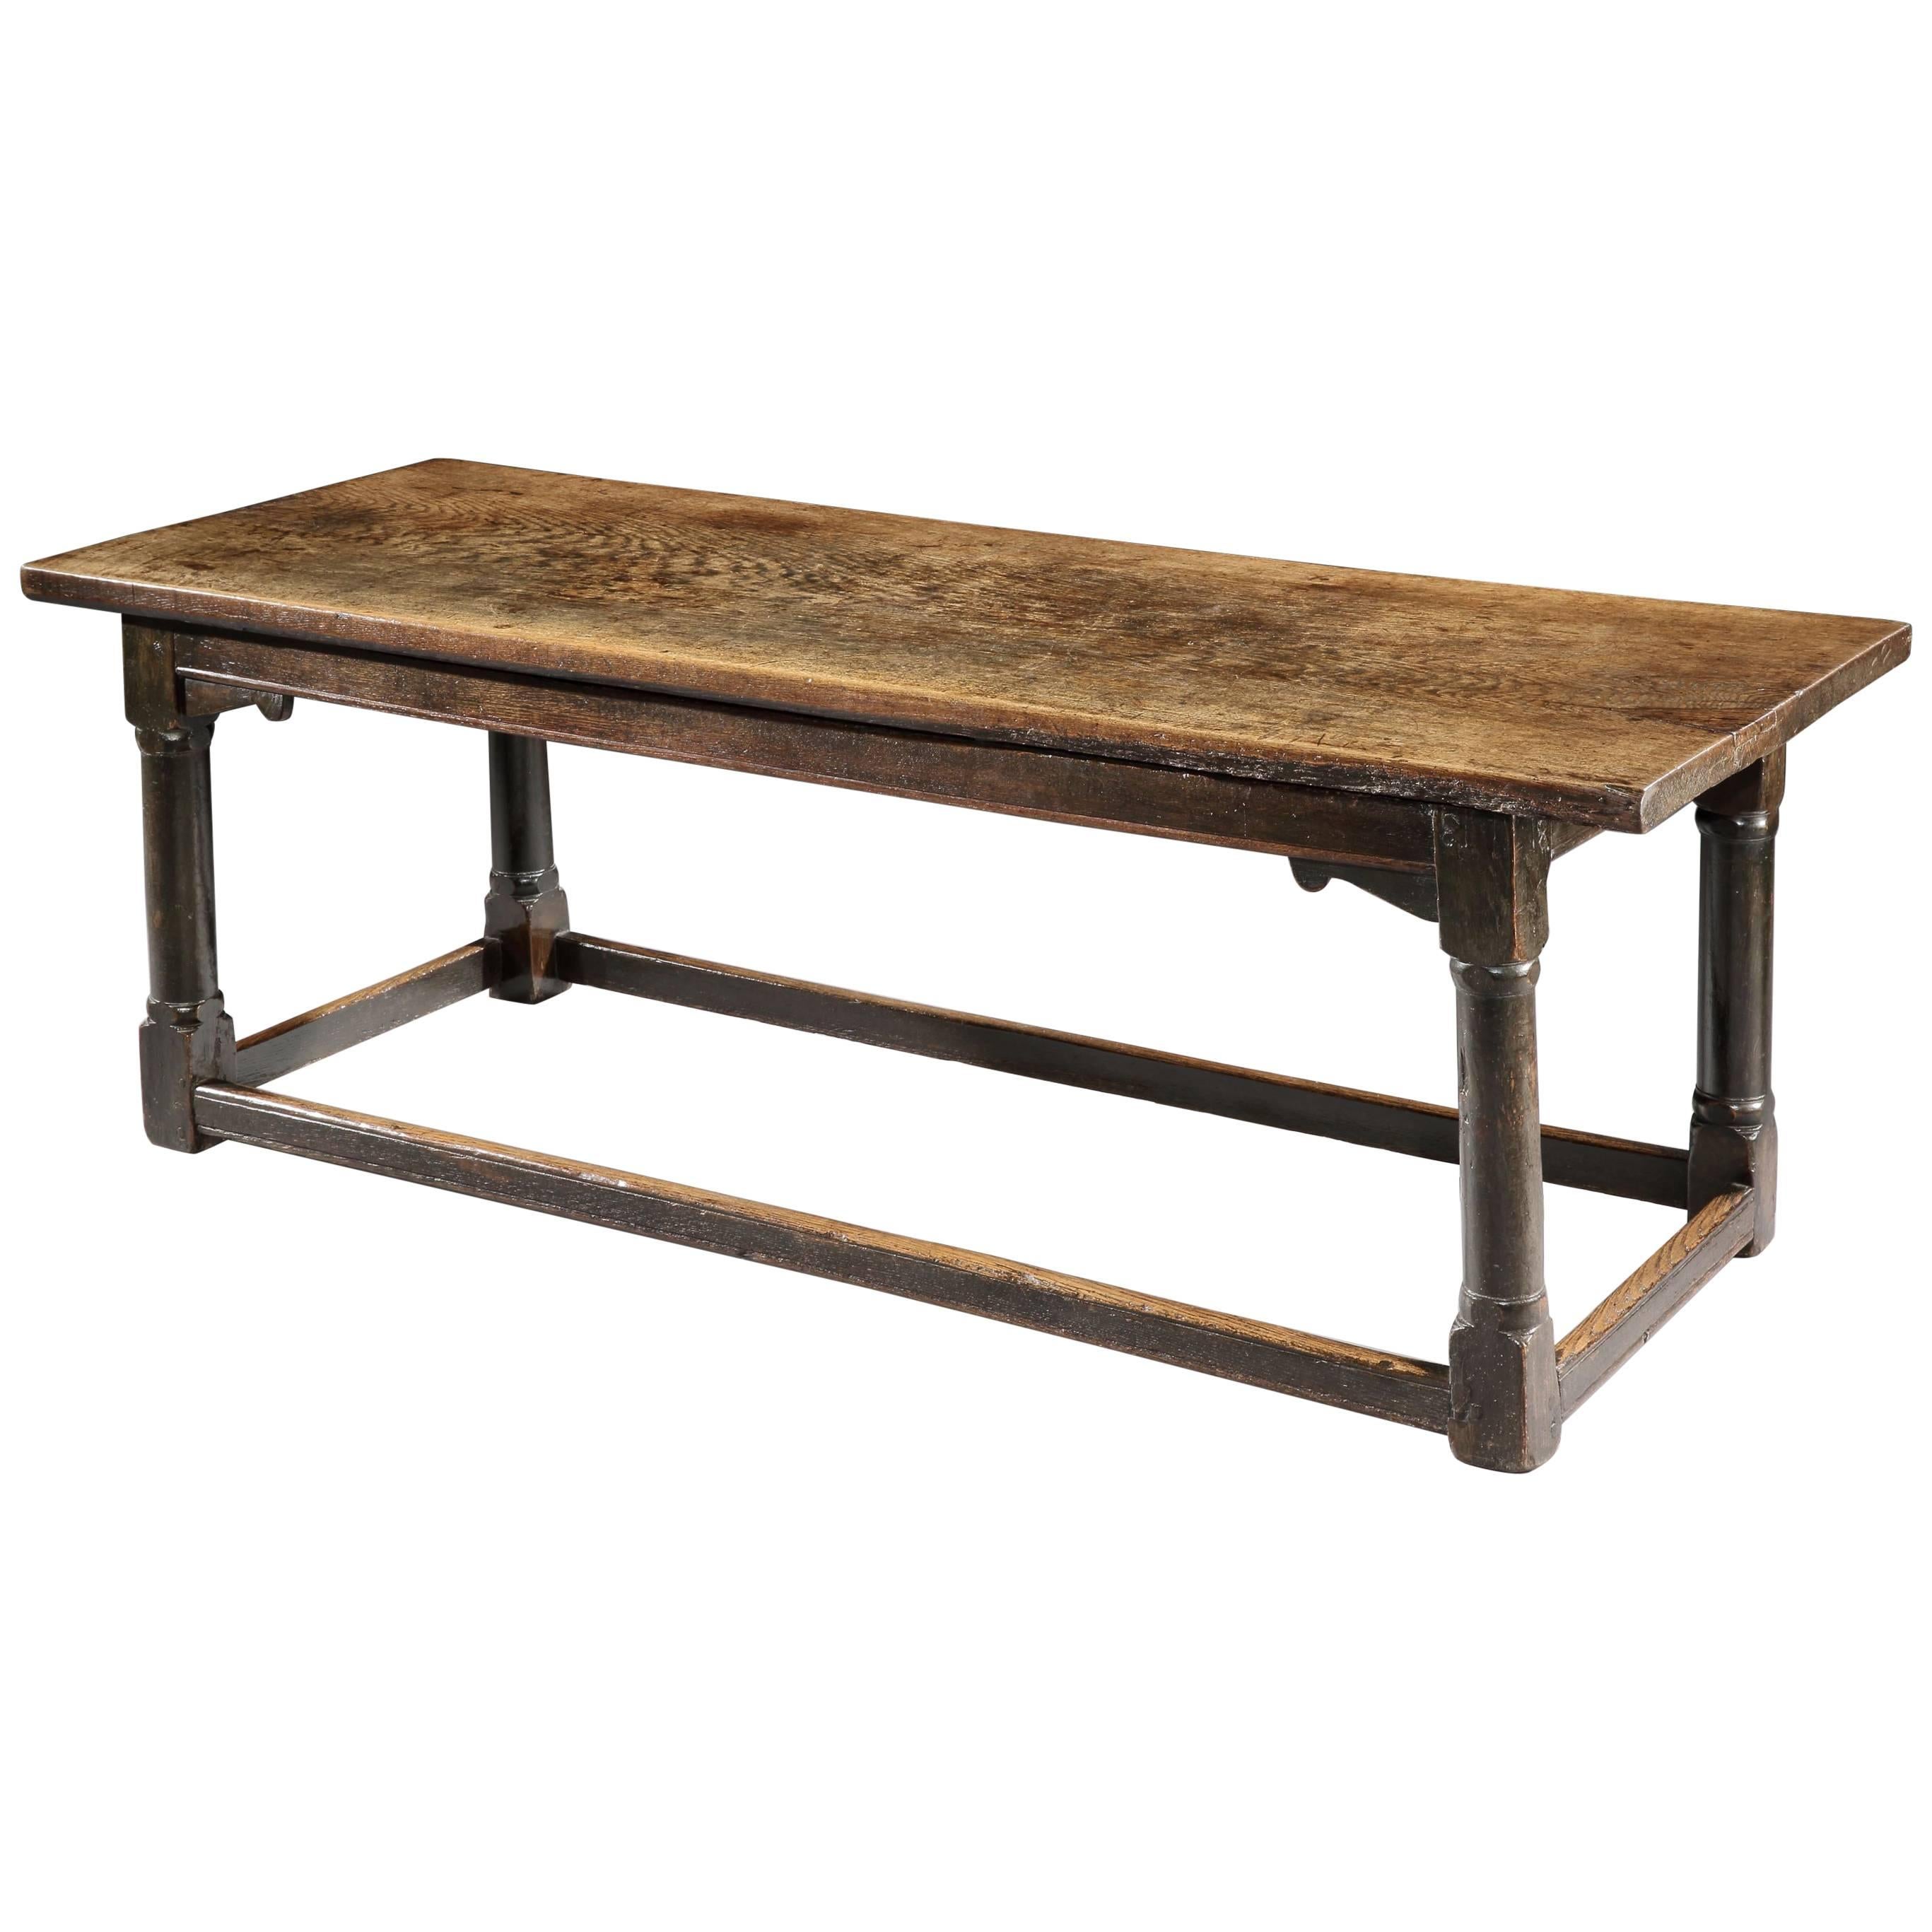 Remarkable Early Refectory Table For Sale